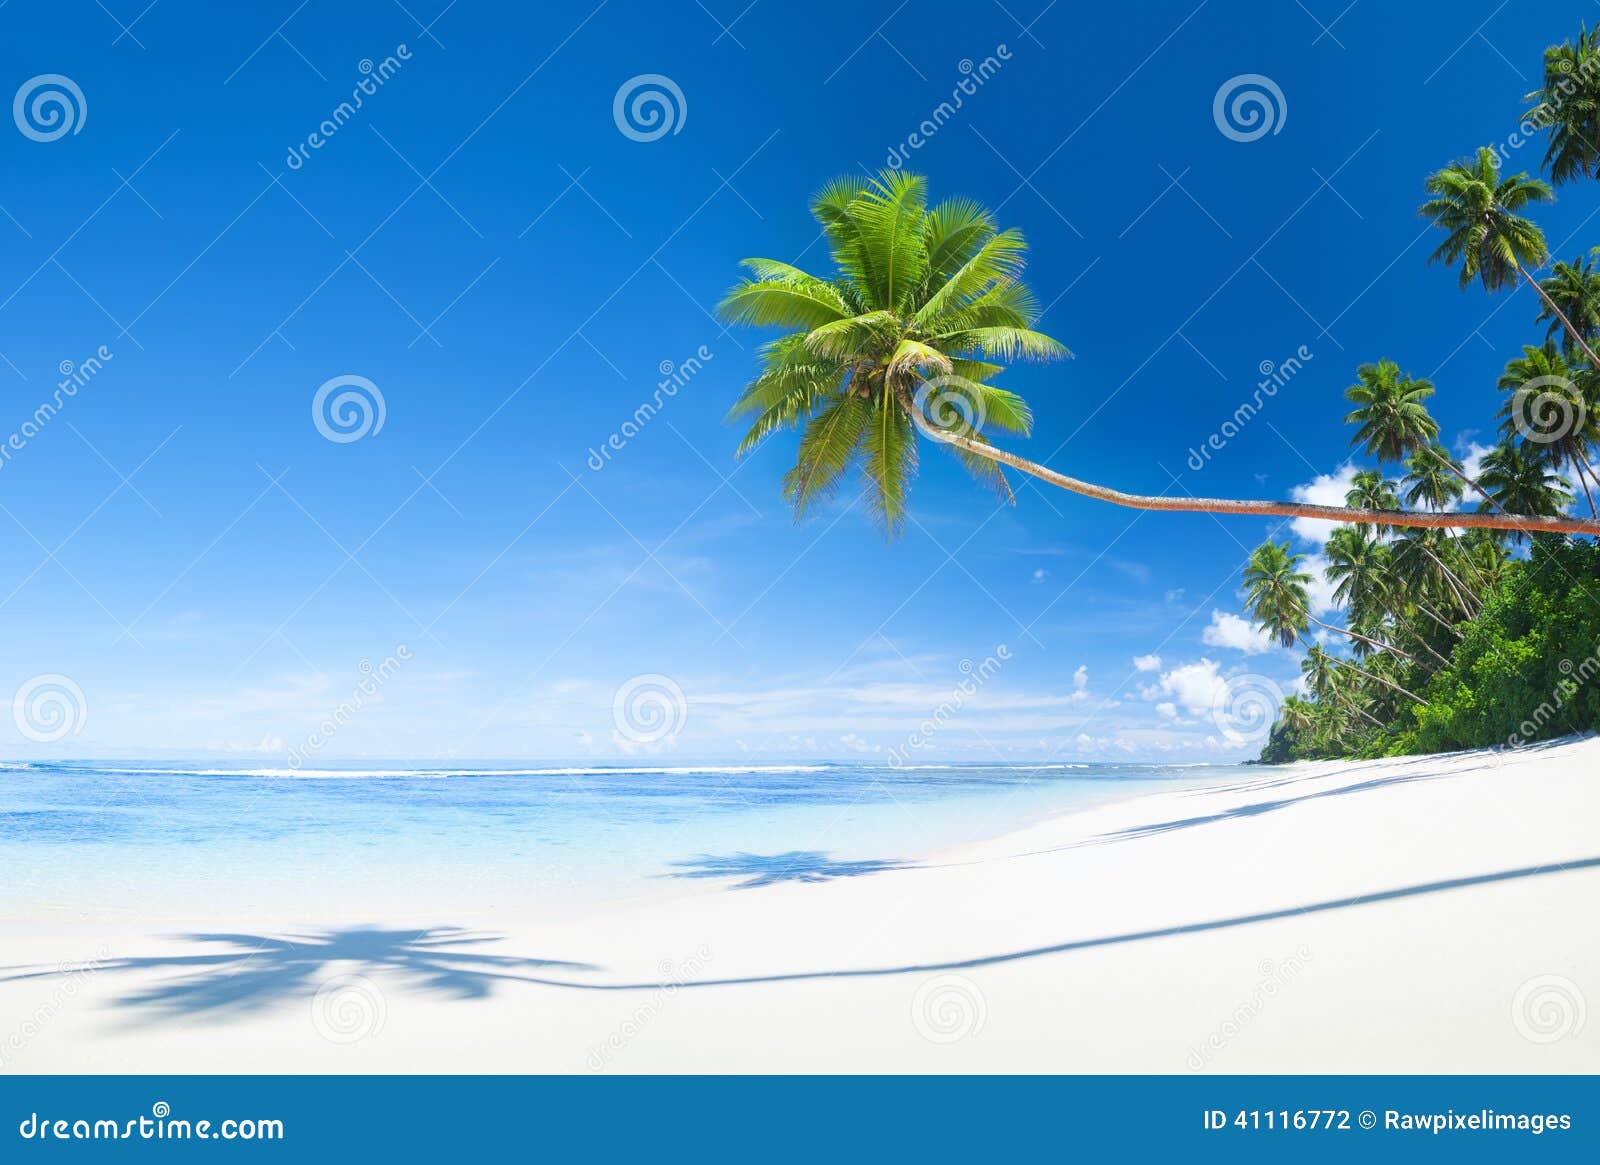 Beautiful Scenic Beach with Palm Tree Stock Photo - Image of climate ...